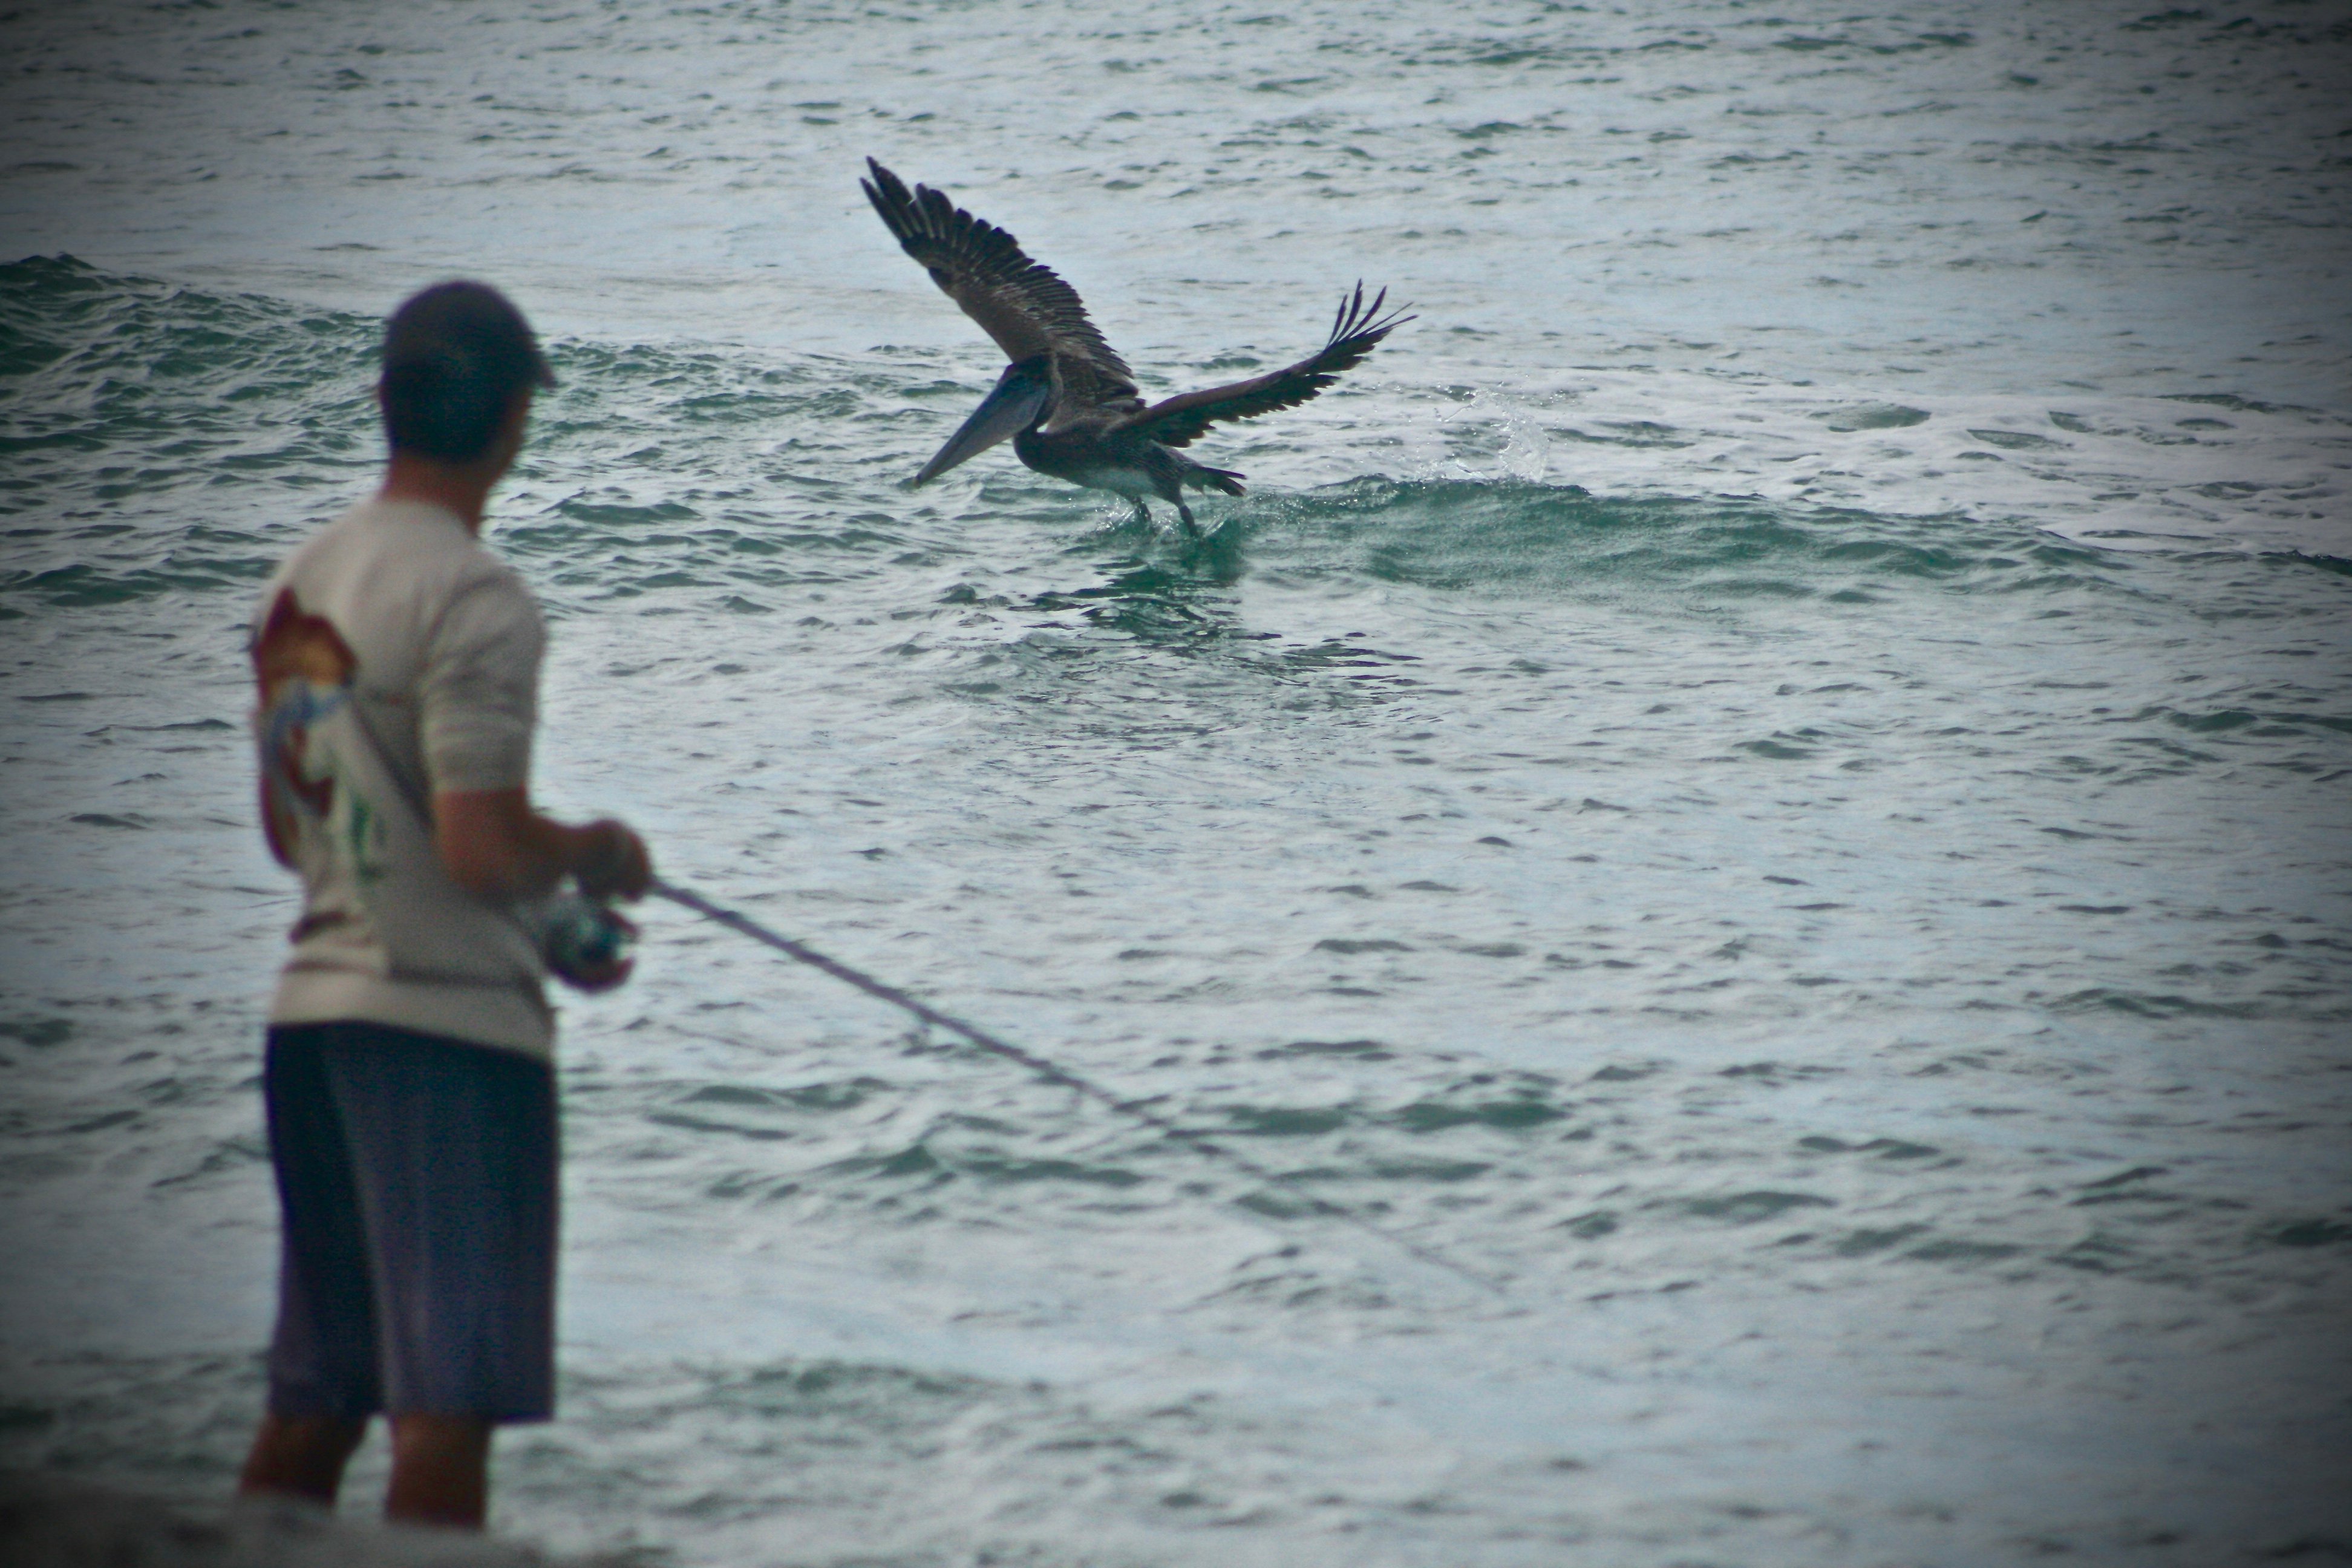 Why didnt you tell me? Fishing at the beach